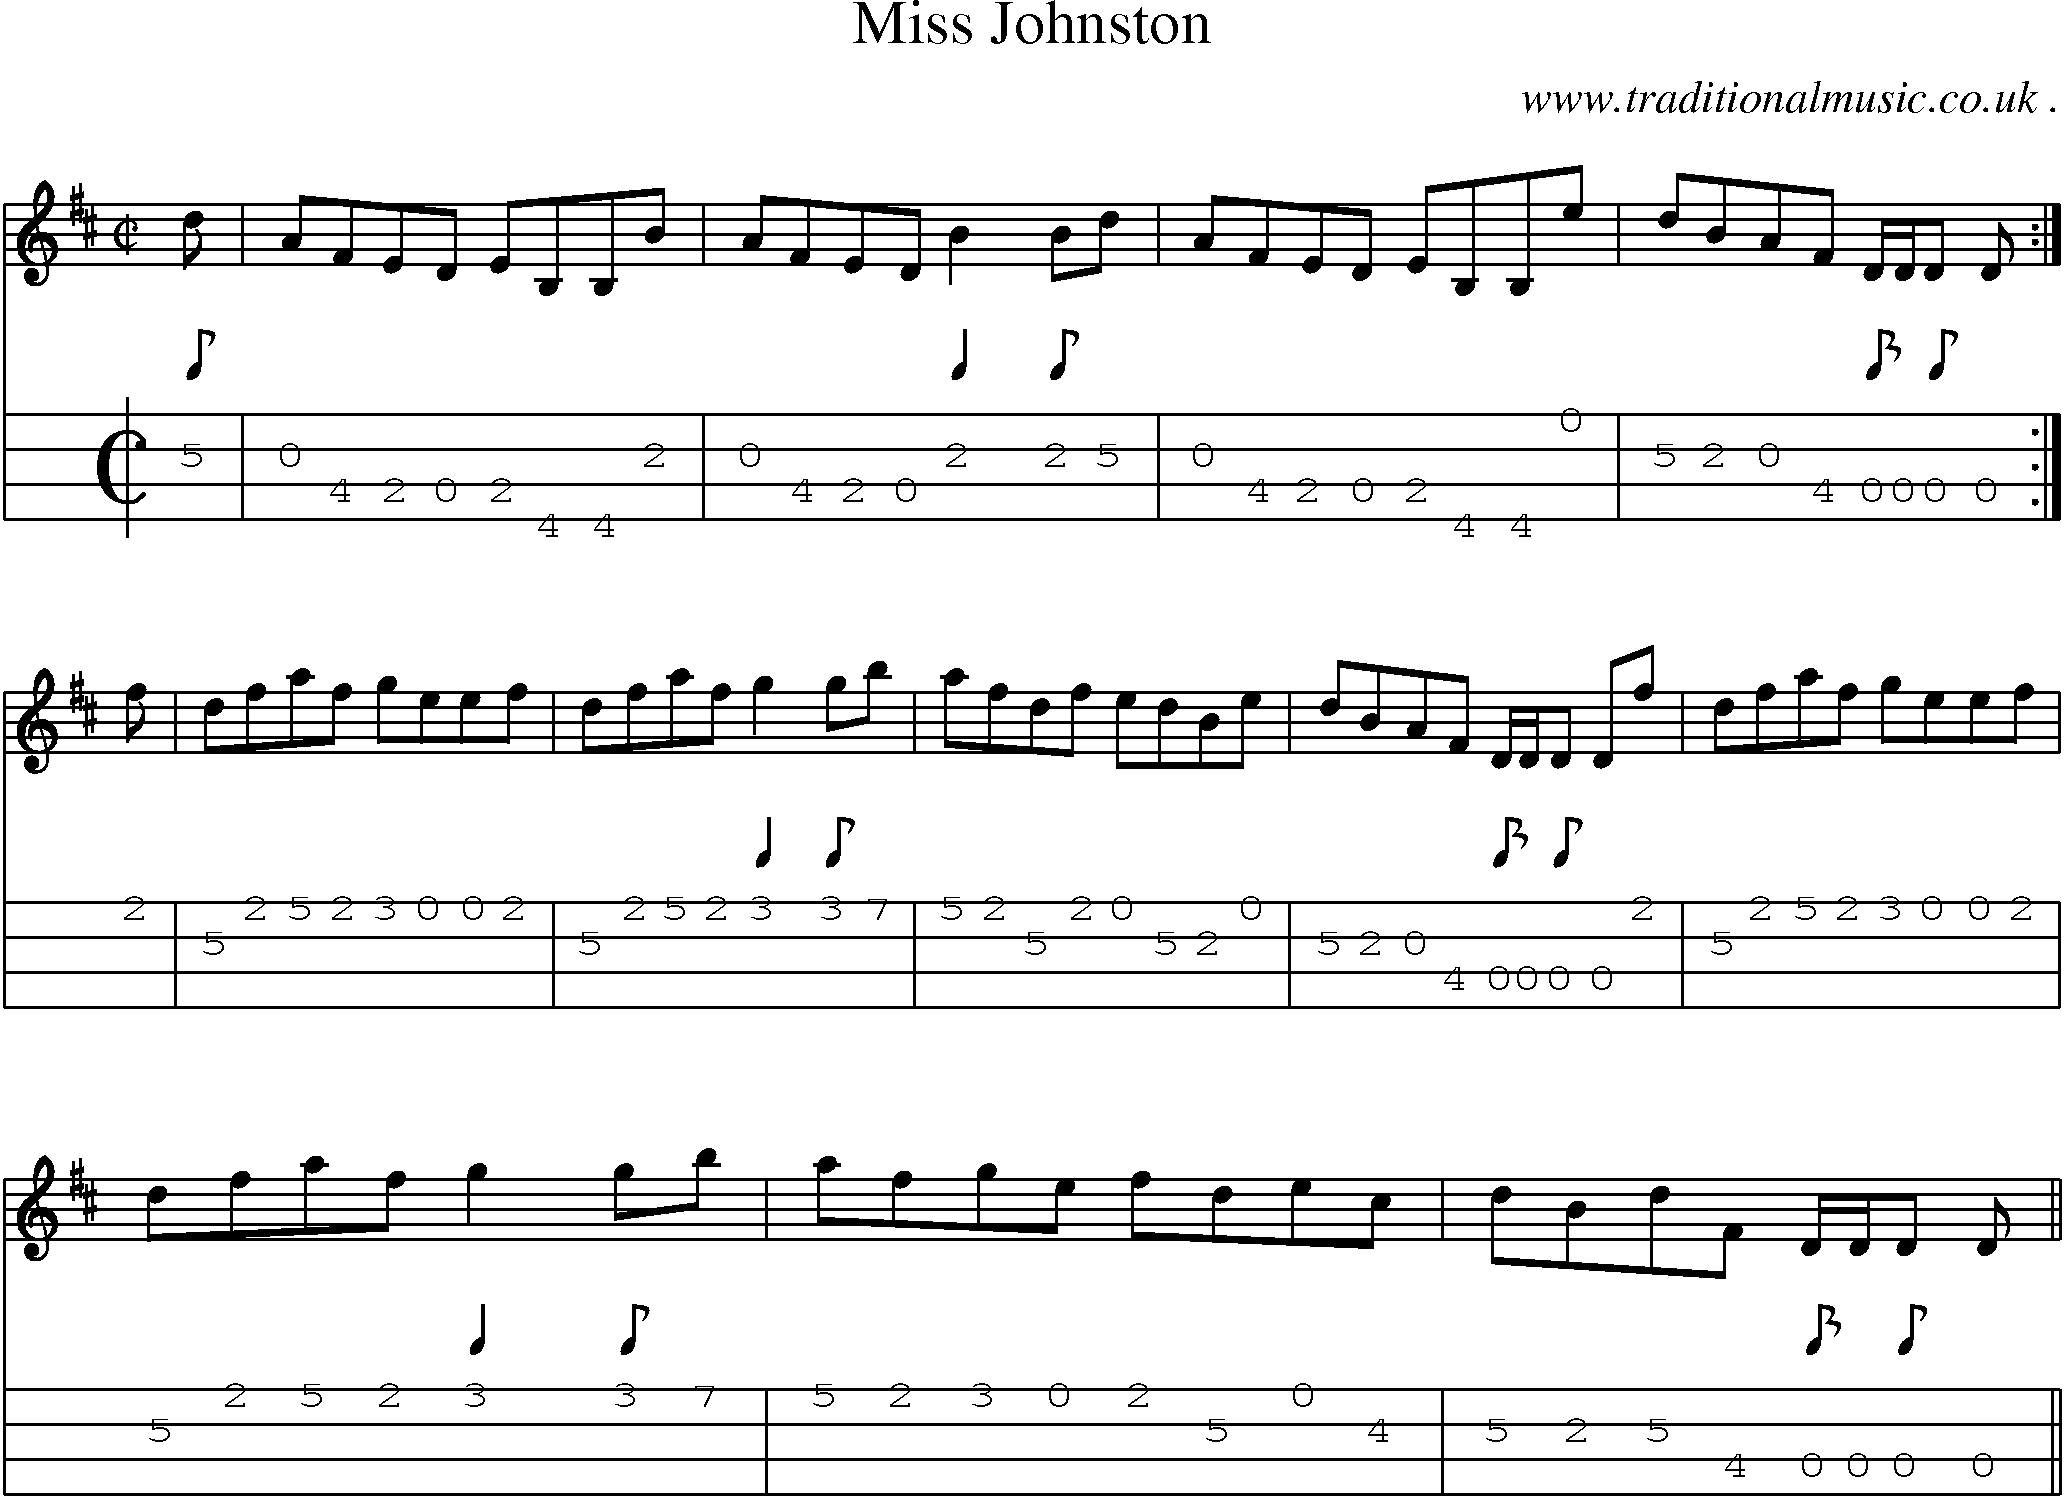 Sheet-music  score, Chords and Mandolin Tabs for Miss Johnston